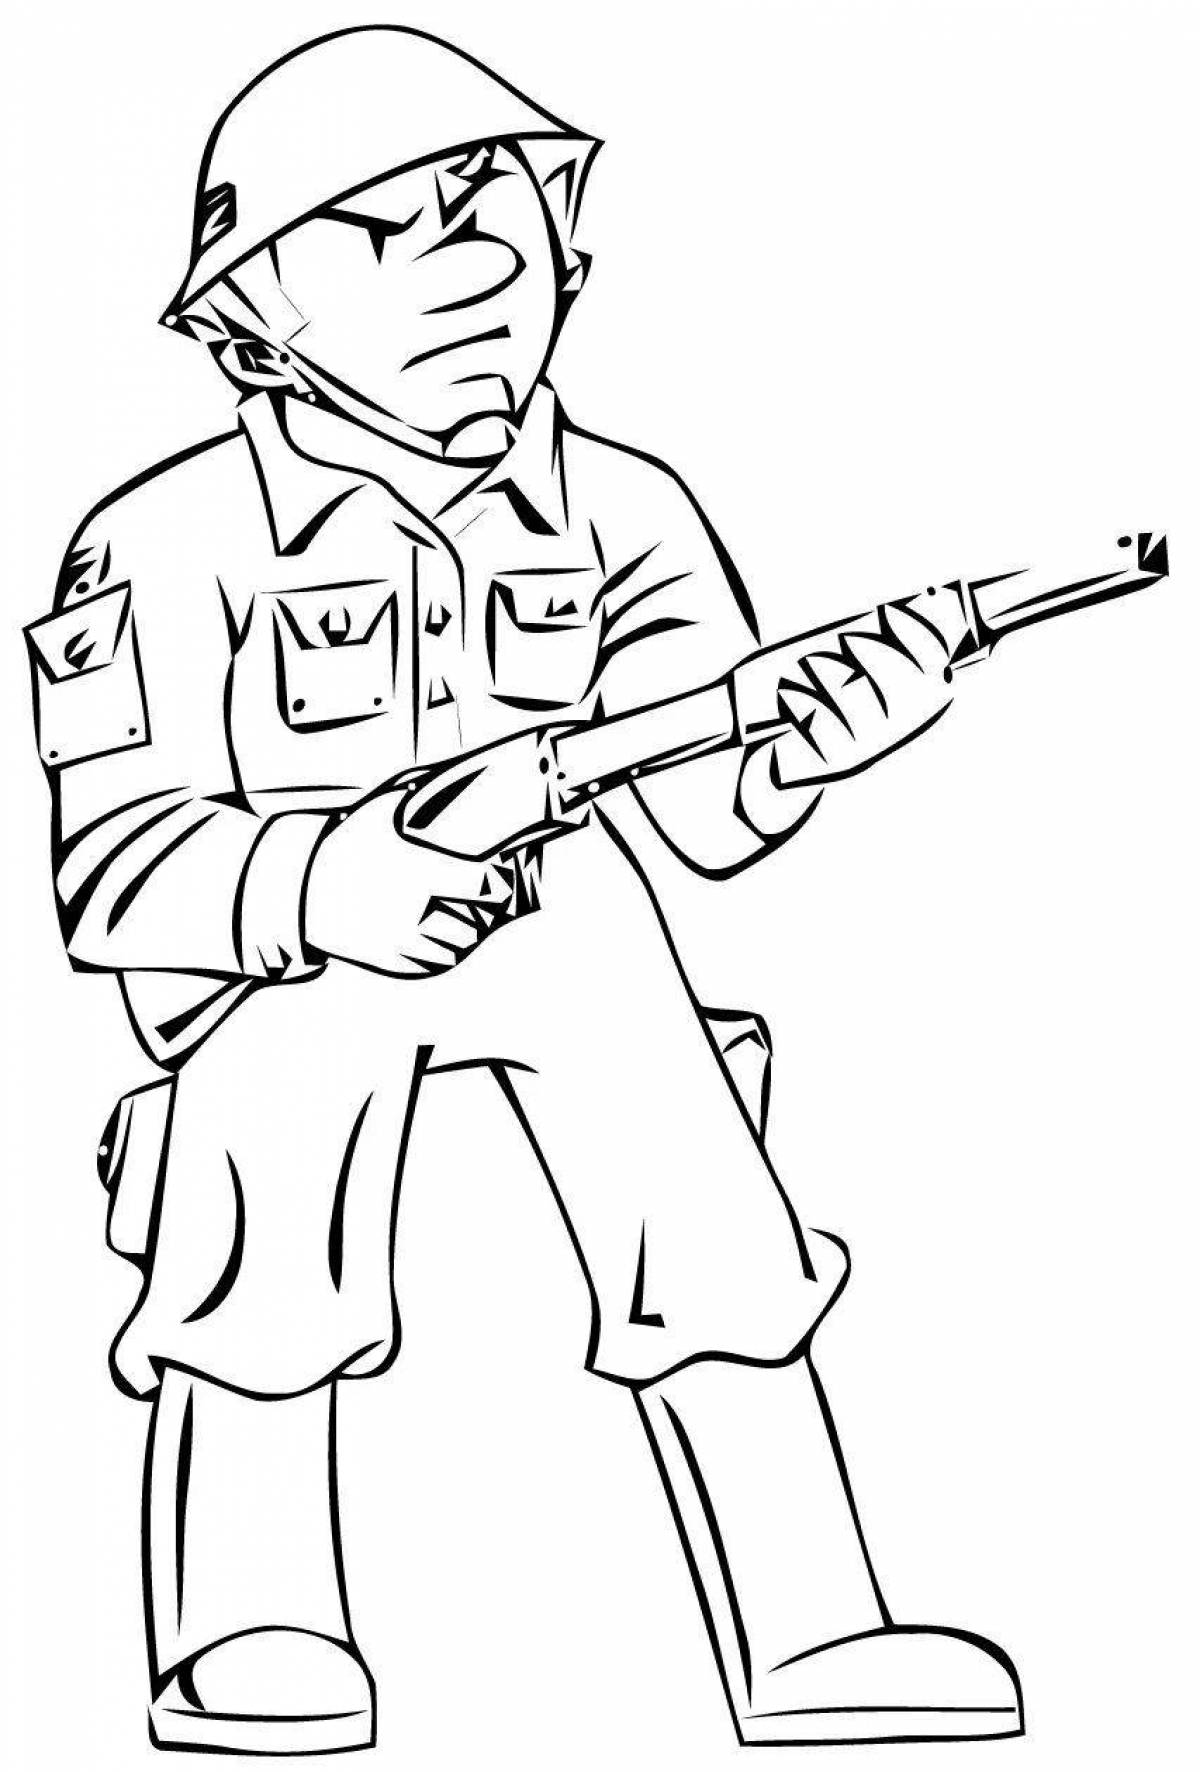 Glowing toy soldiers coloring pages for boys